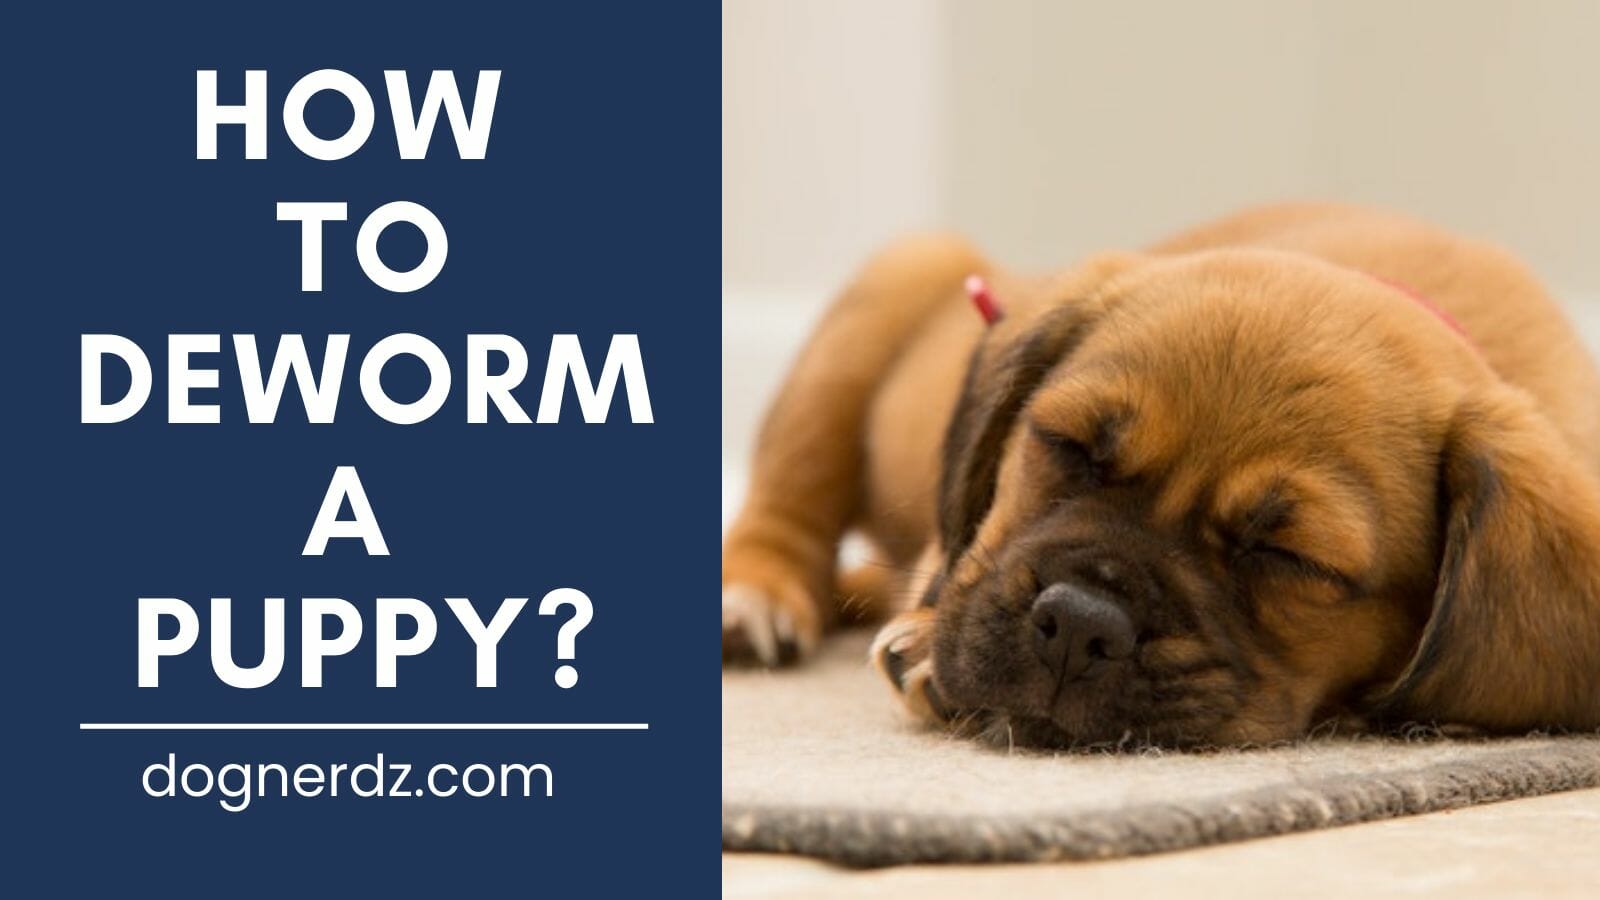 How to Deworm a Puppy